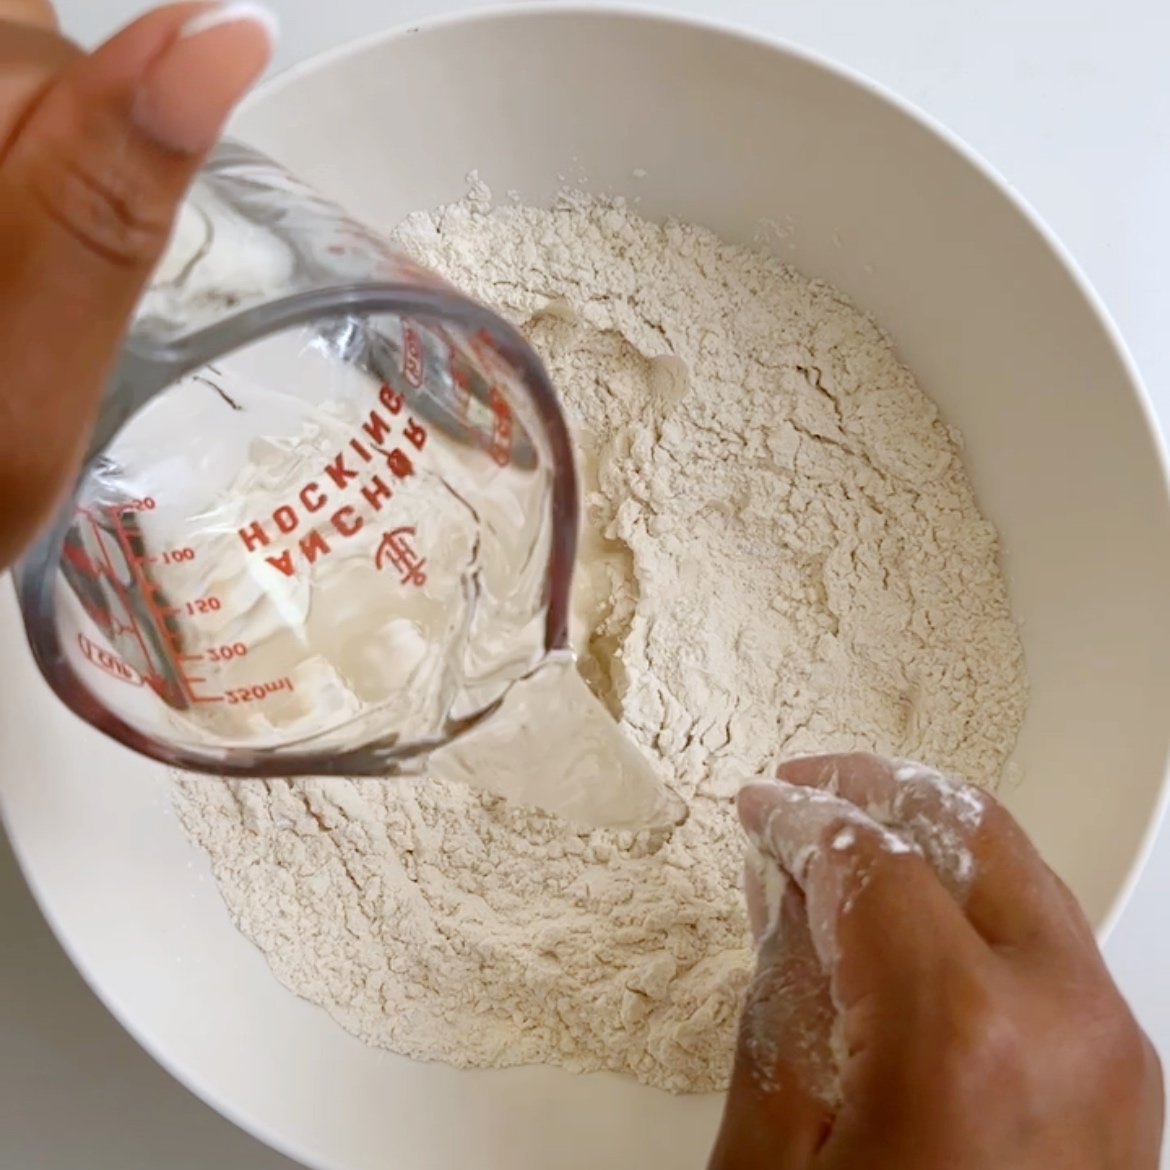 water being poured into dry ingredients